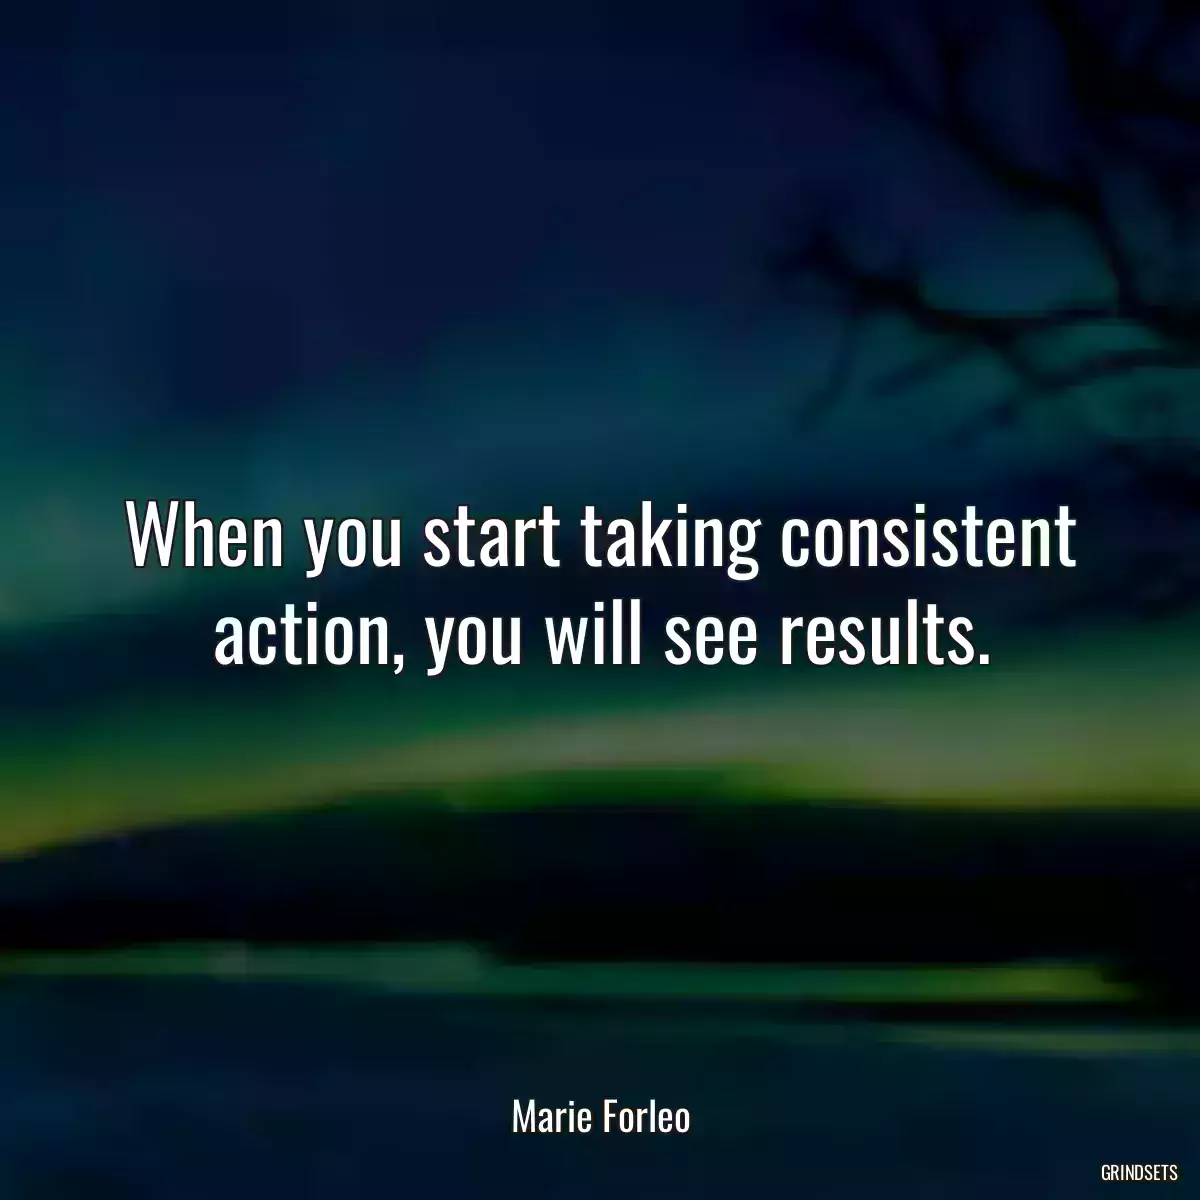 When you start taking consistent action, you will see results.